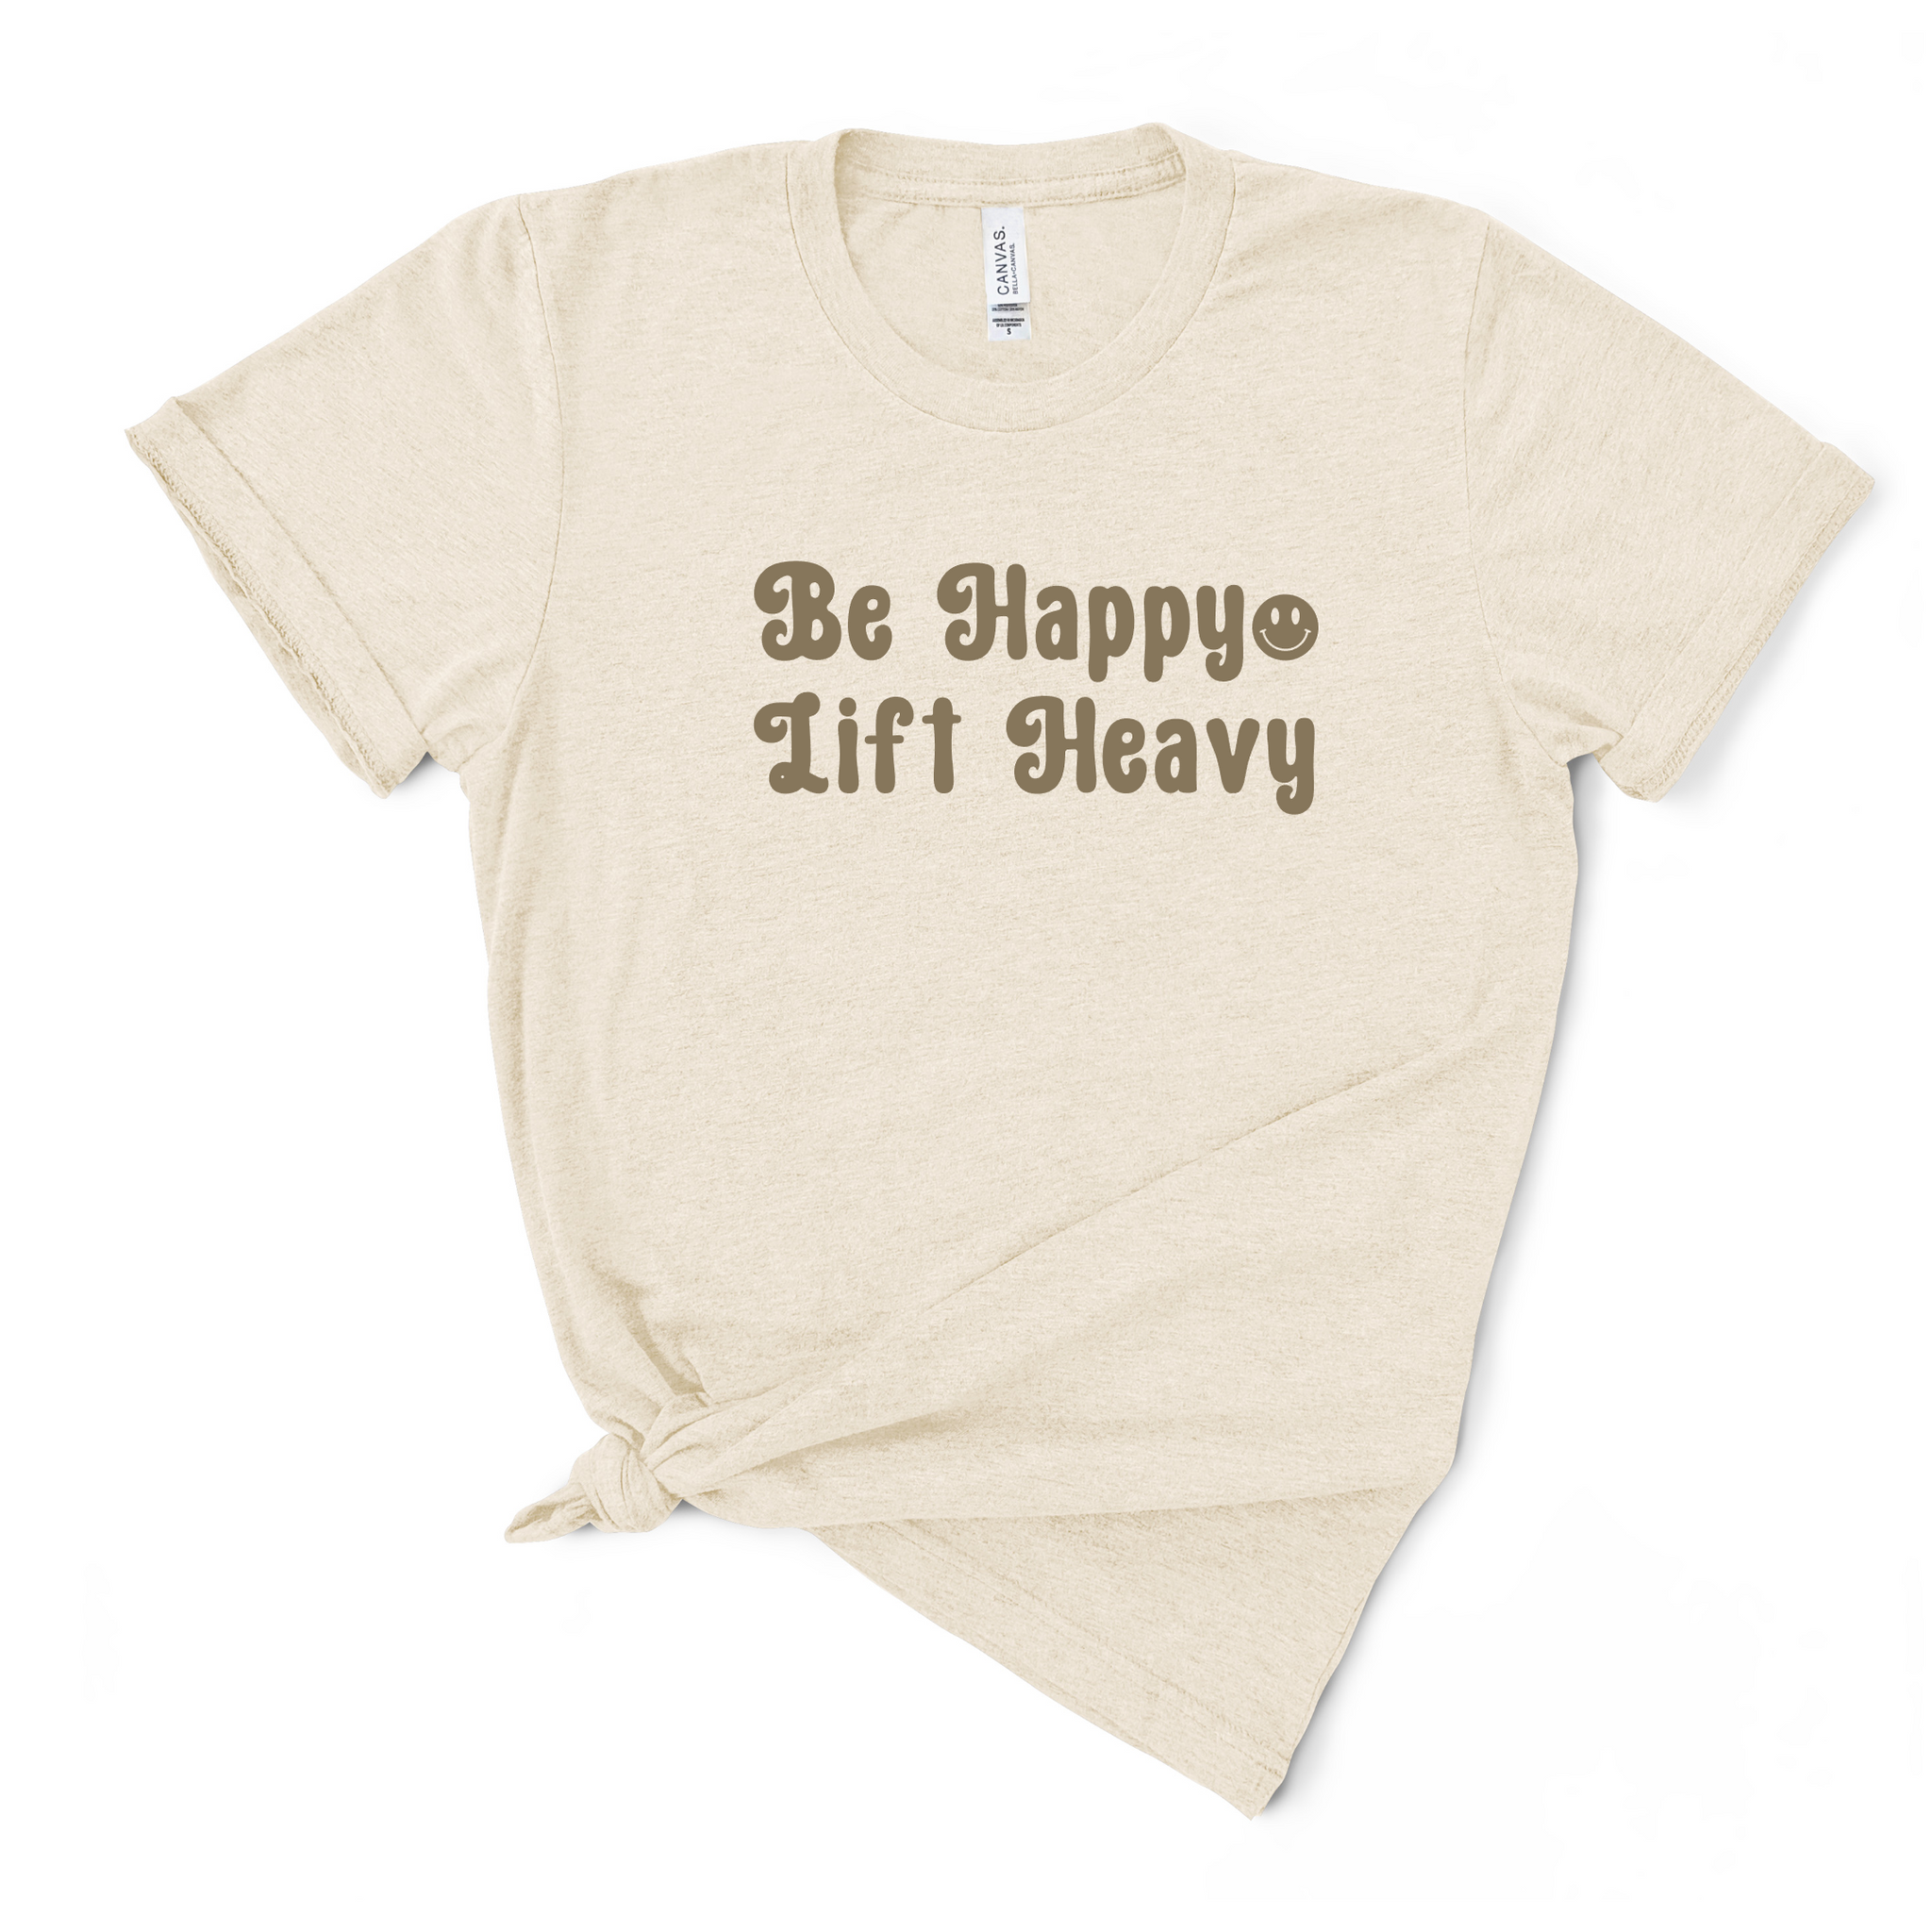 Be Happy Light Heavy Smiley - Natural Tshirt - Adult & Women's Gym Top - S003